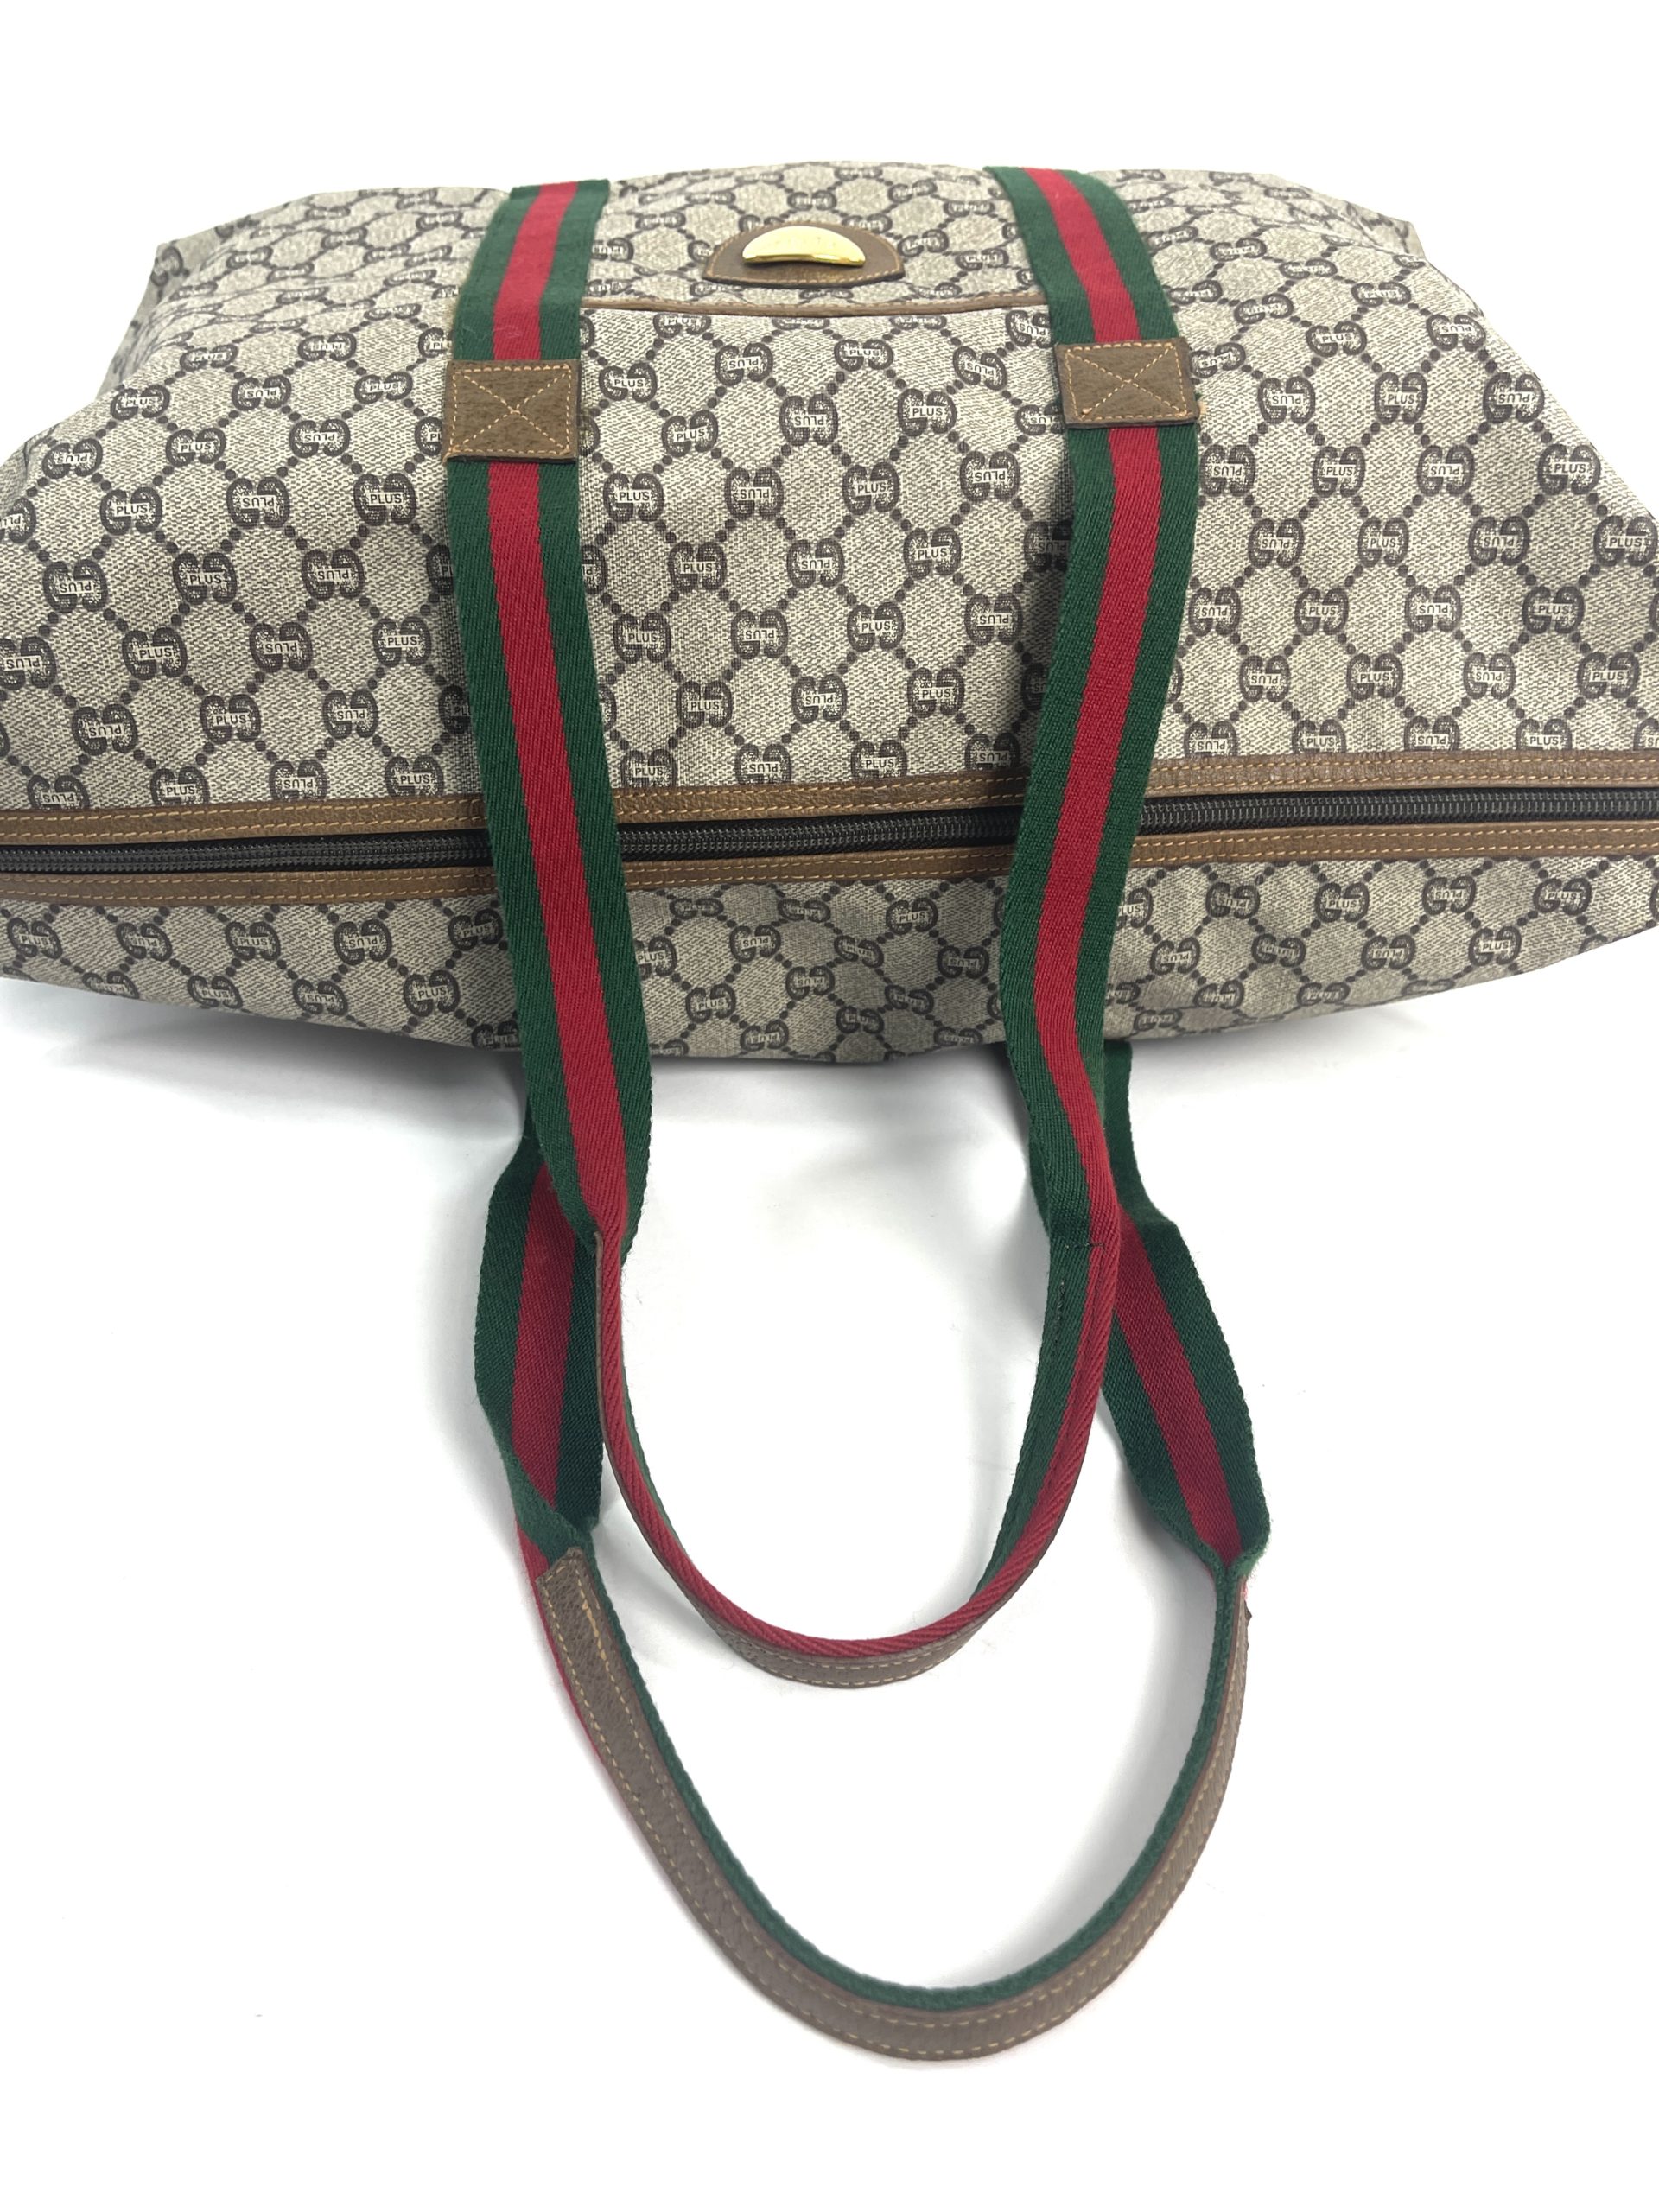 Vintage Gucci Coated Canvas Tote Bag